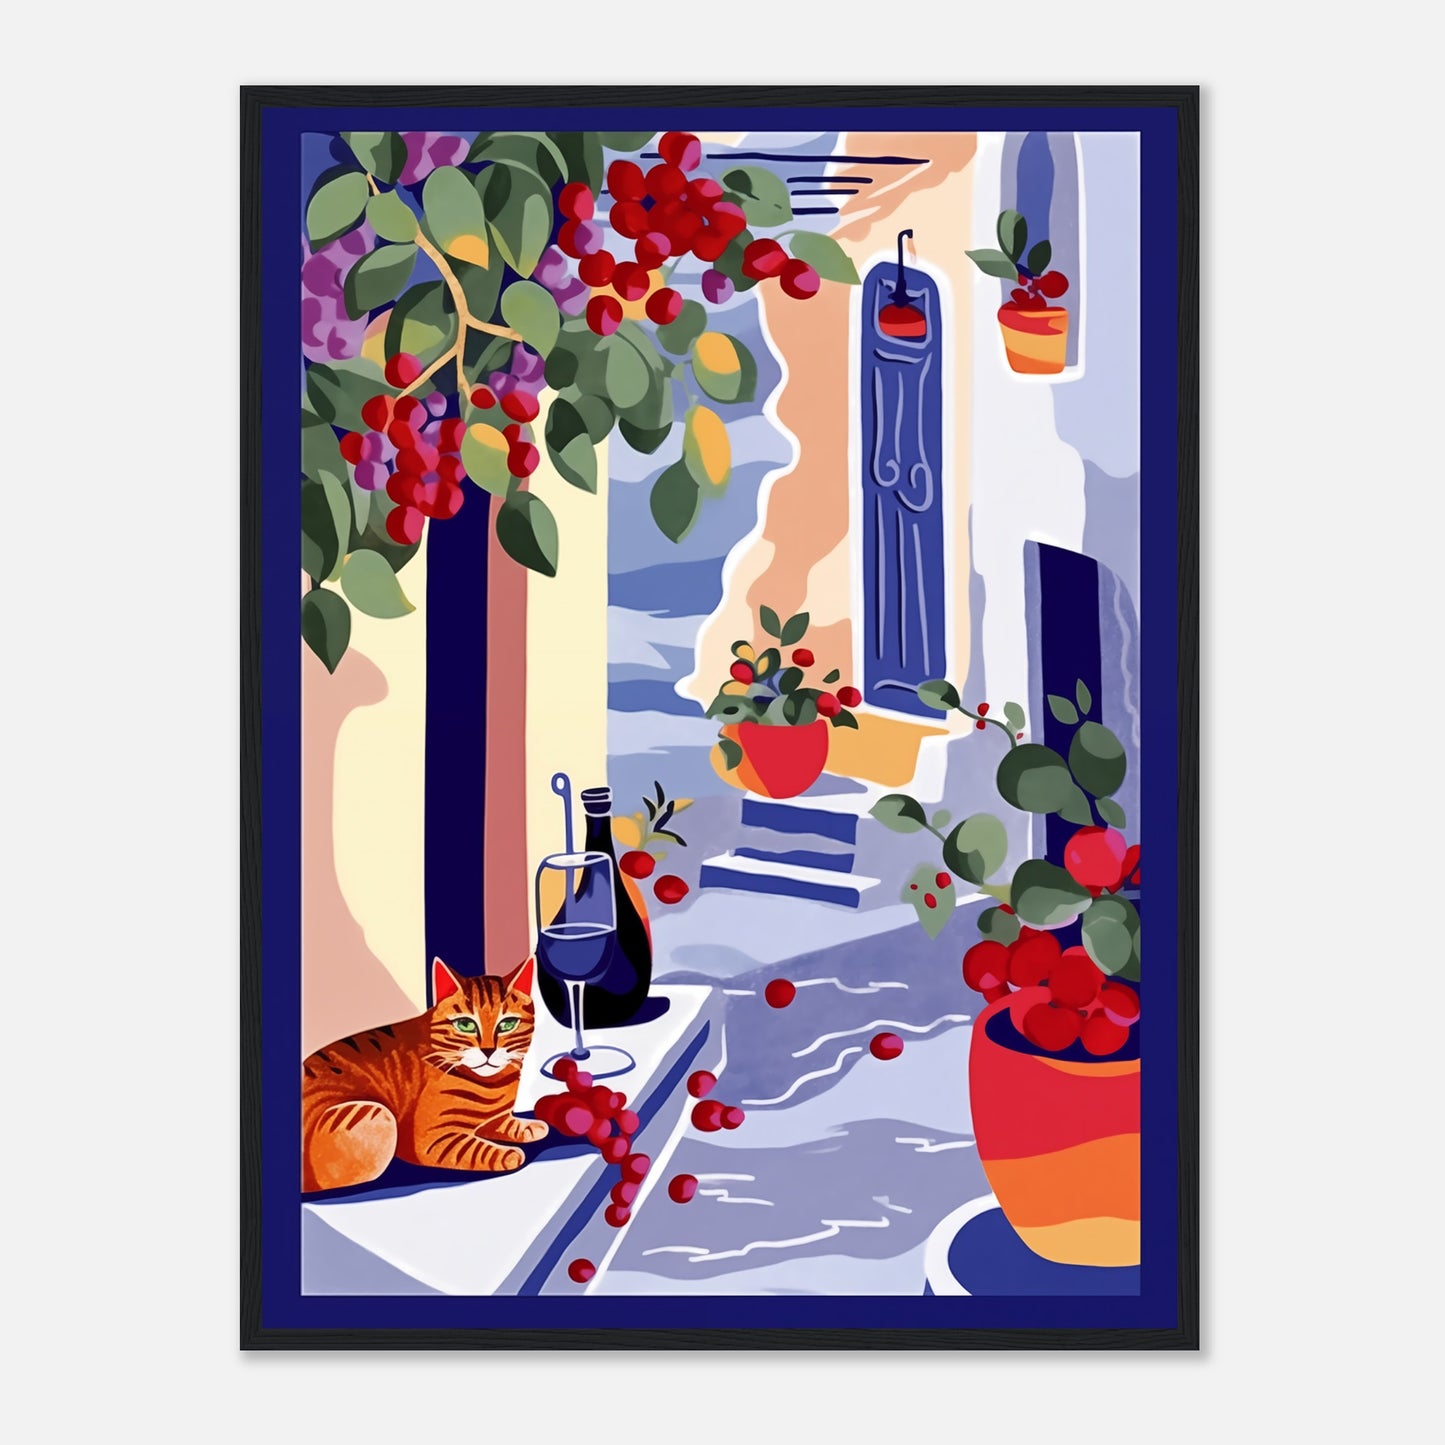 Illustration of a cat sitting on a windowsill with plants and a glass of wine.